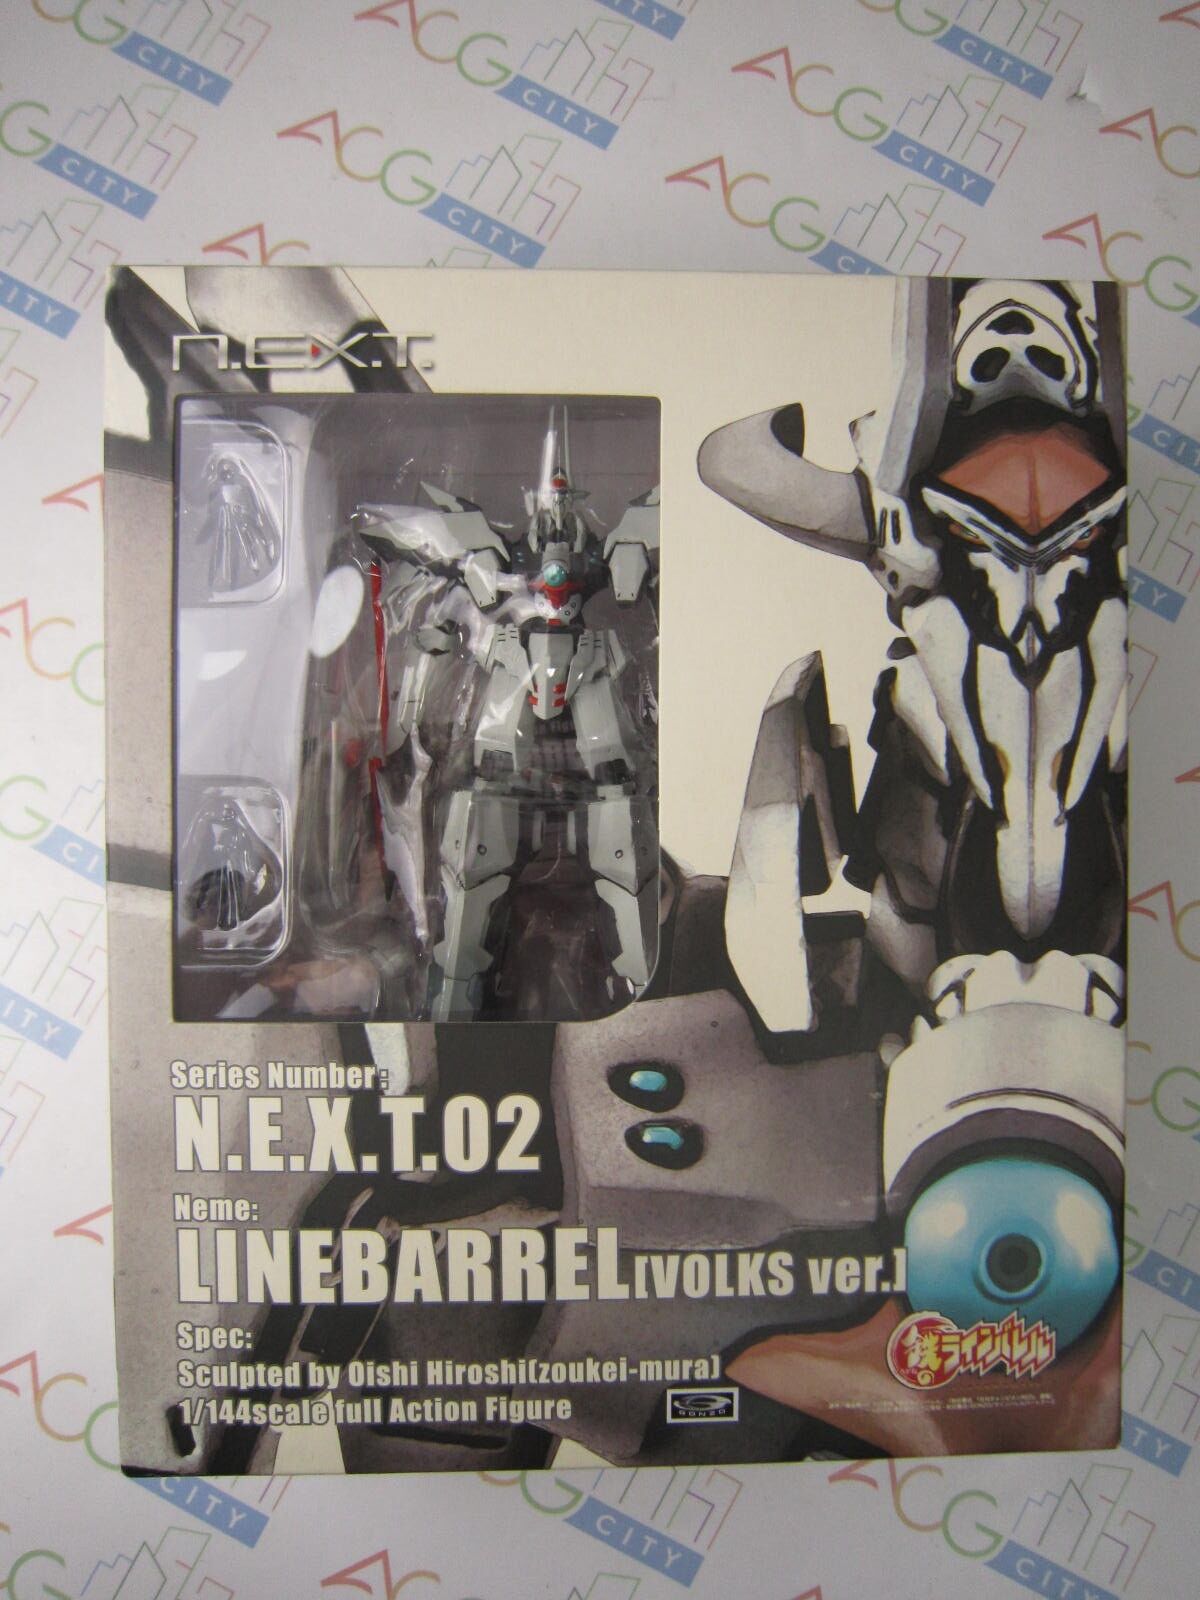 Linebarrels of Iron N.E.X.T. 02 1/144 Linebarrel Volks Ver. Action Figure USED